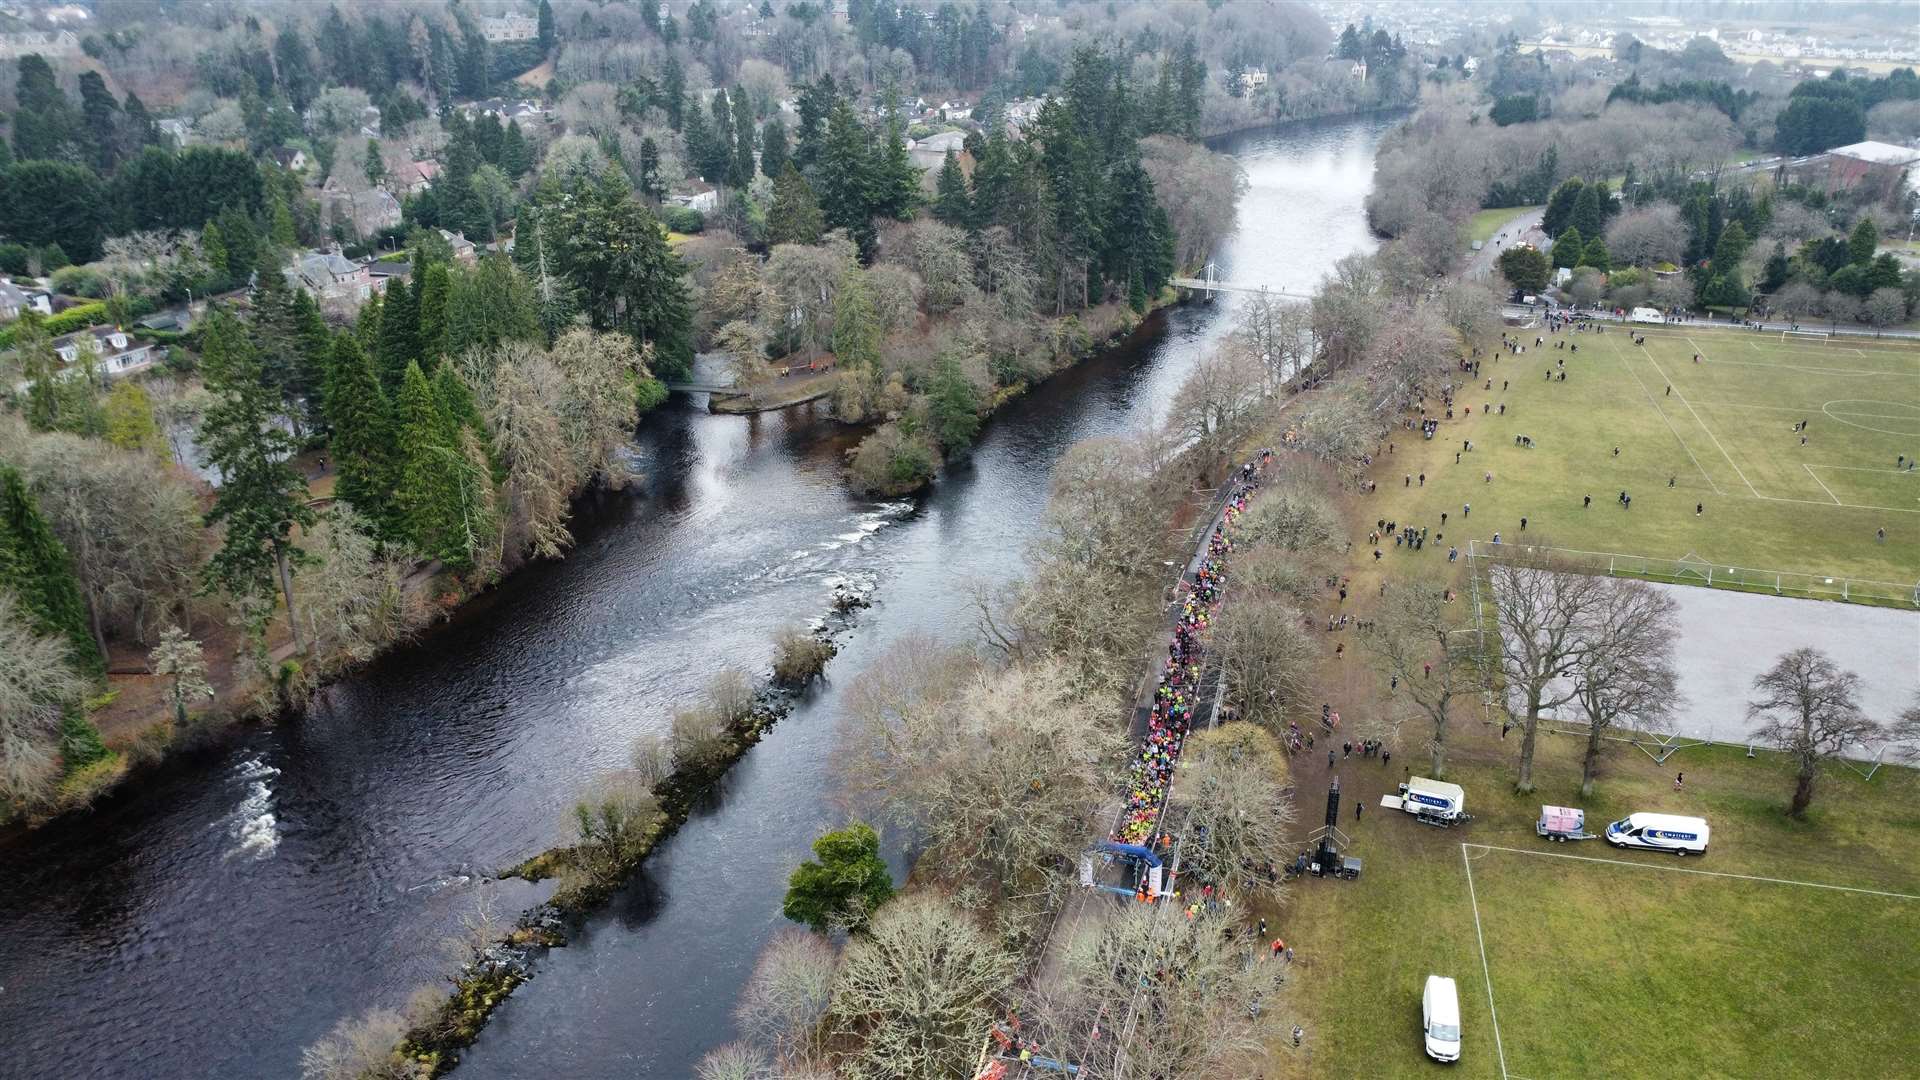 Looking over the start line from above Bught Park.